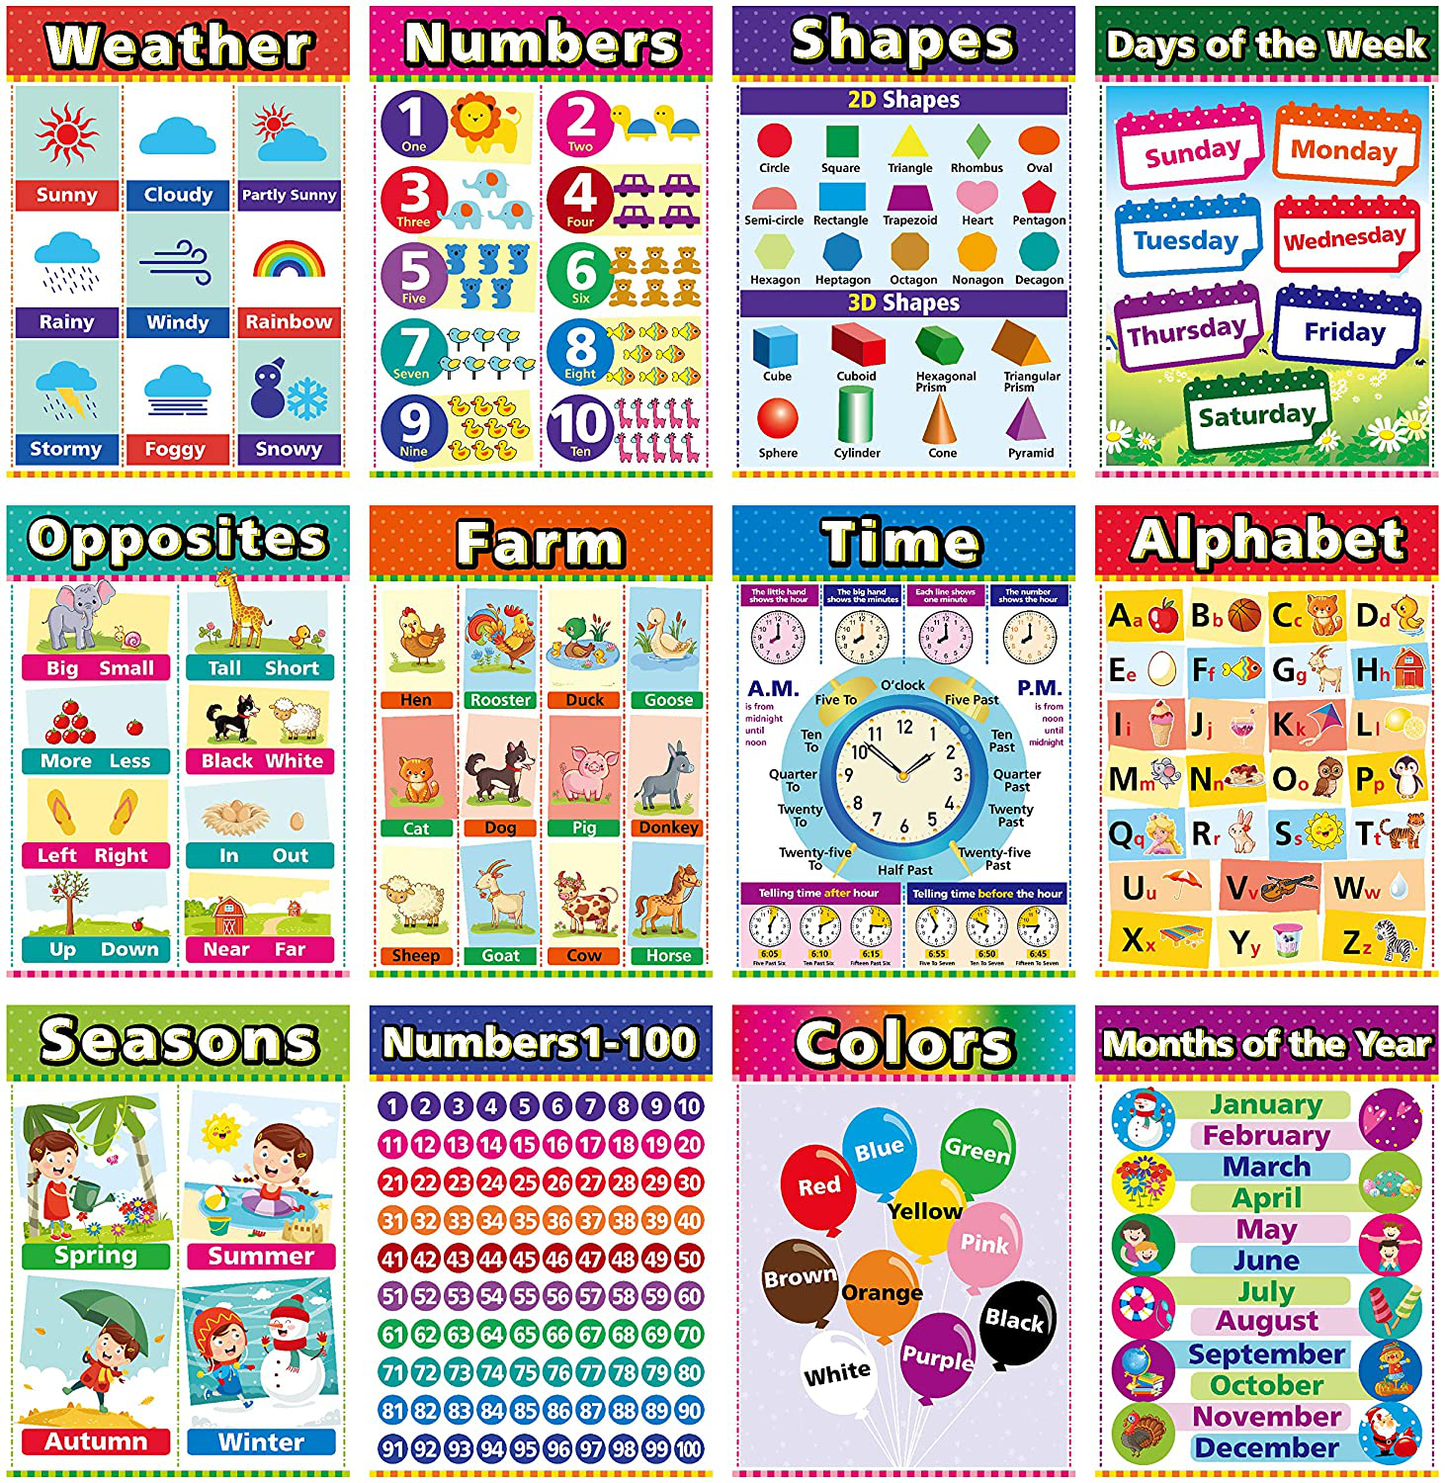 Kids Posters for Kindergarten Classroom Learning, Toddler School Supplies,Educational Toys for 2-4 Year Olds with Glue Point Dot for Nursery Homeschool Kindergarten Classroom Includes Abc Alphabet,Fruit,Season,Emotions and More(18 Pieces, English Style)